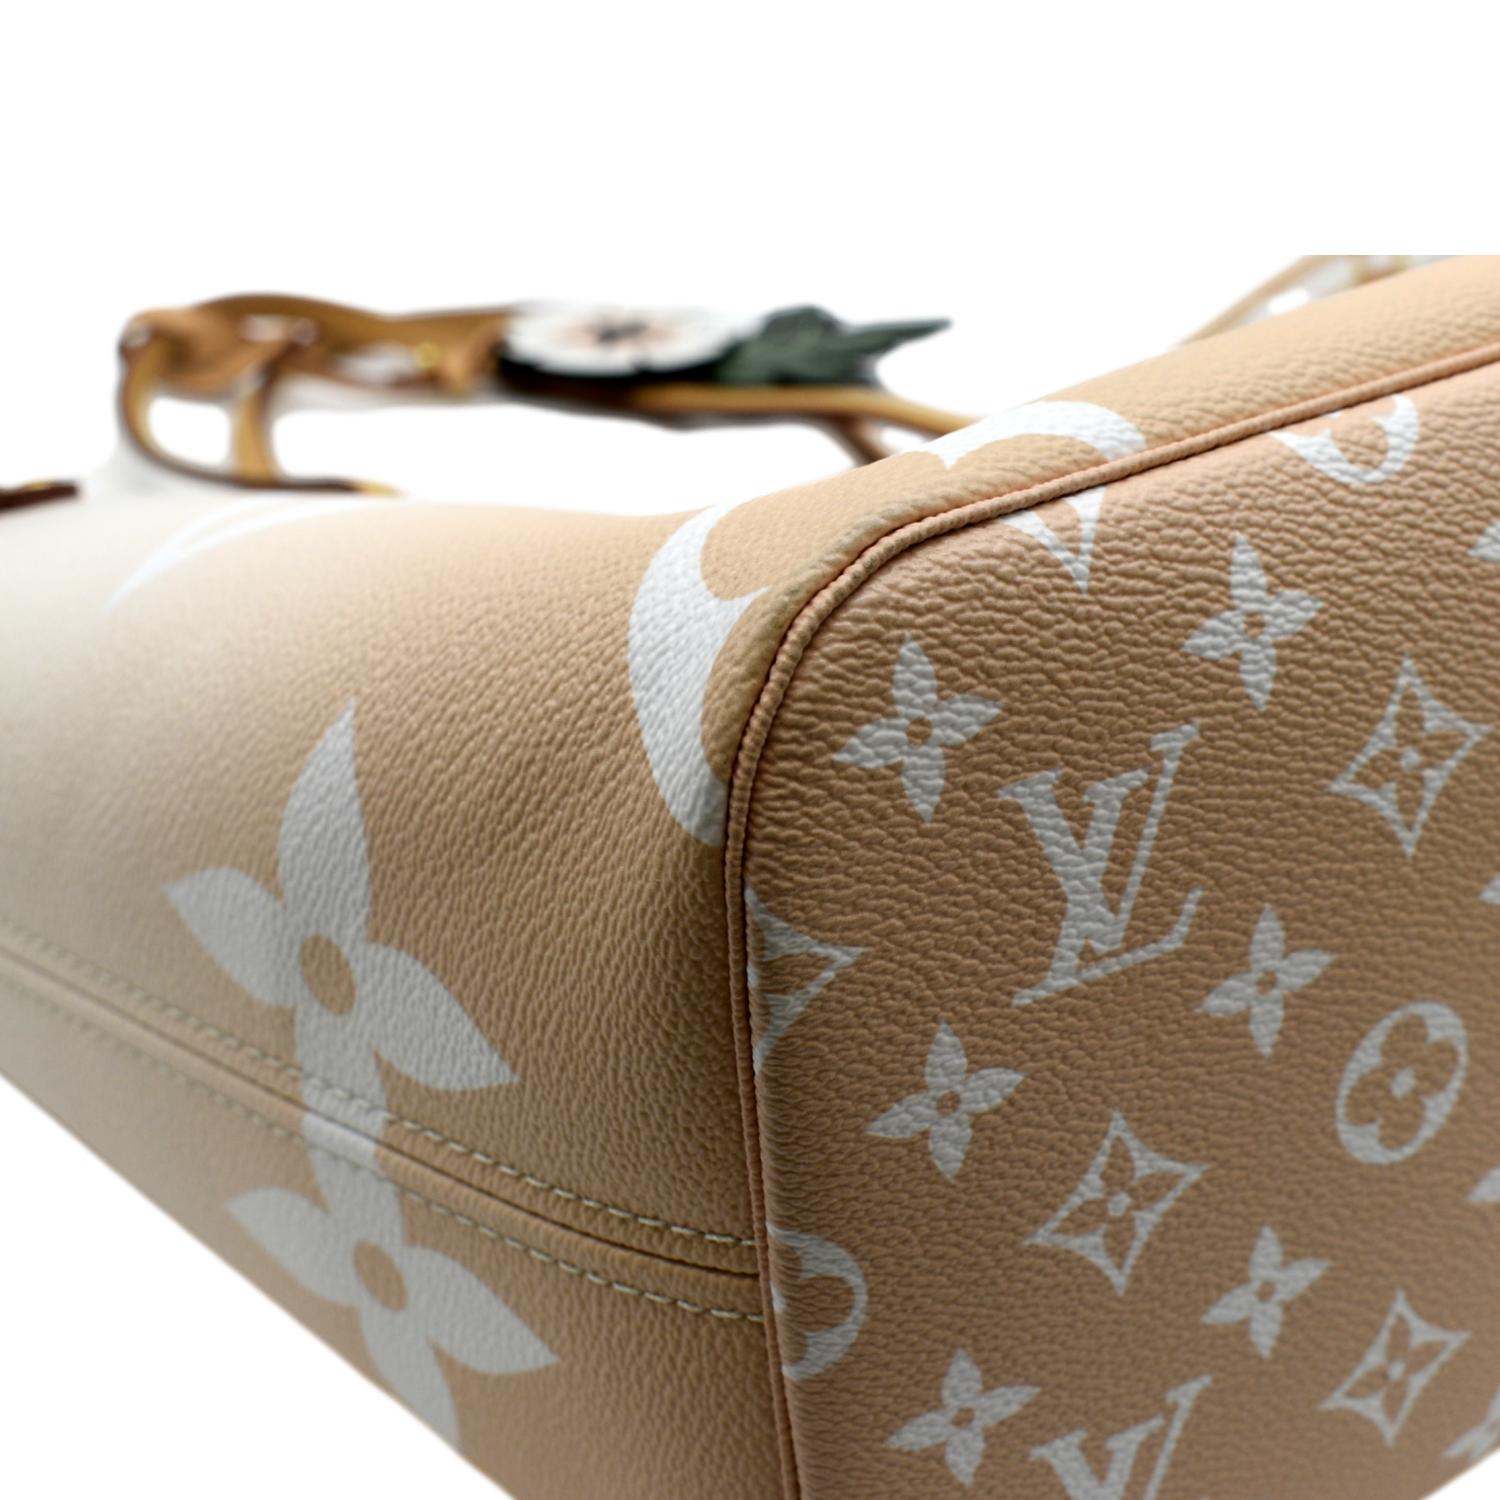 Louis Vuitton Giant Monogram Canvas By The Pool Neverfull MM Tote, Louis  Vuitton Handbags